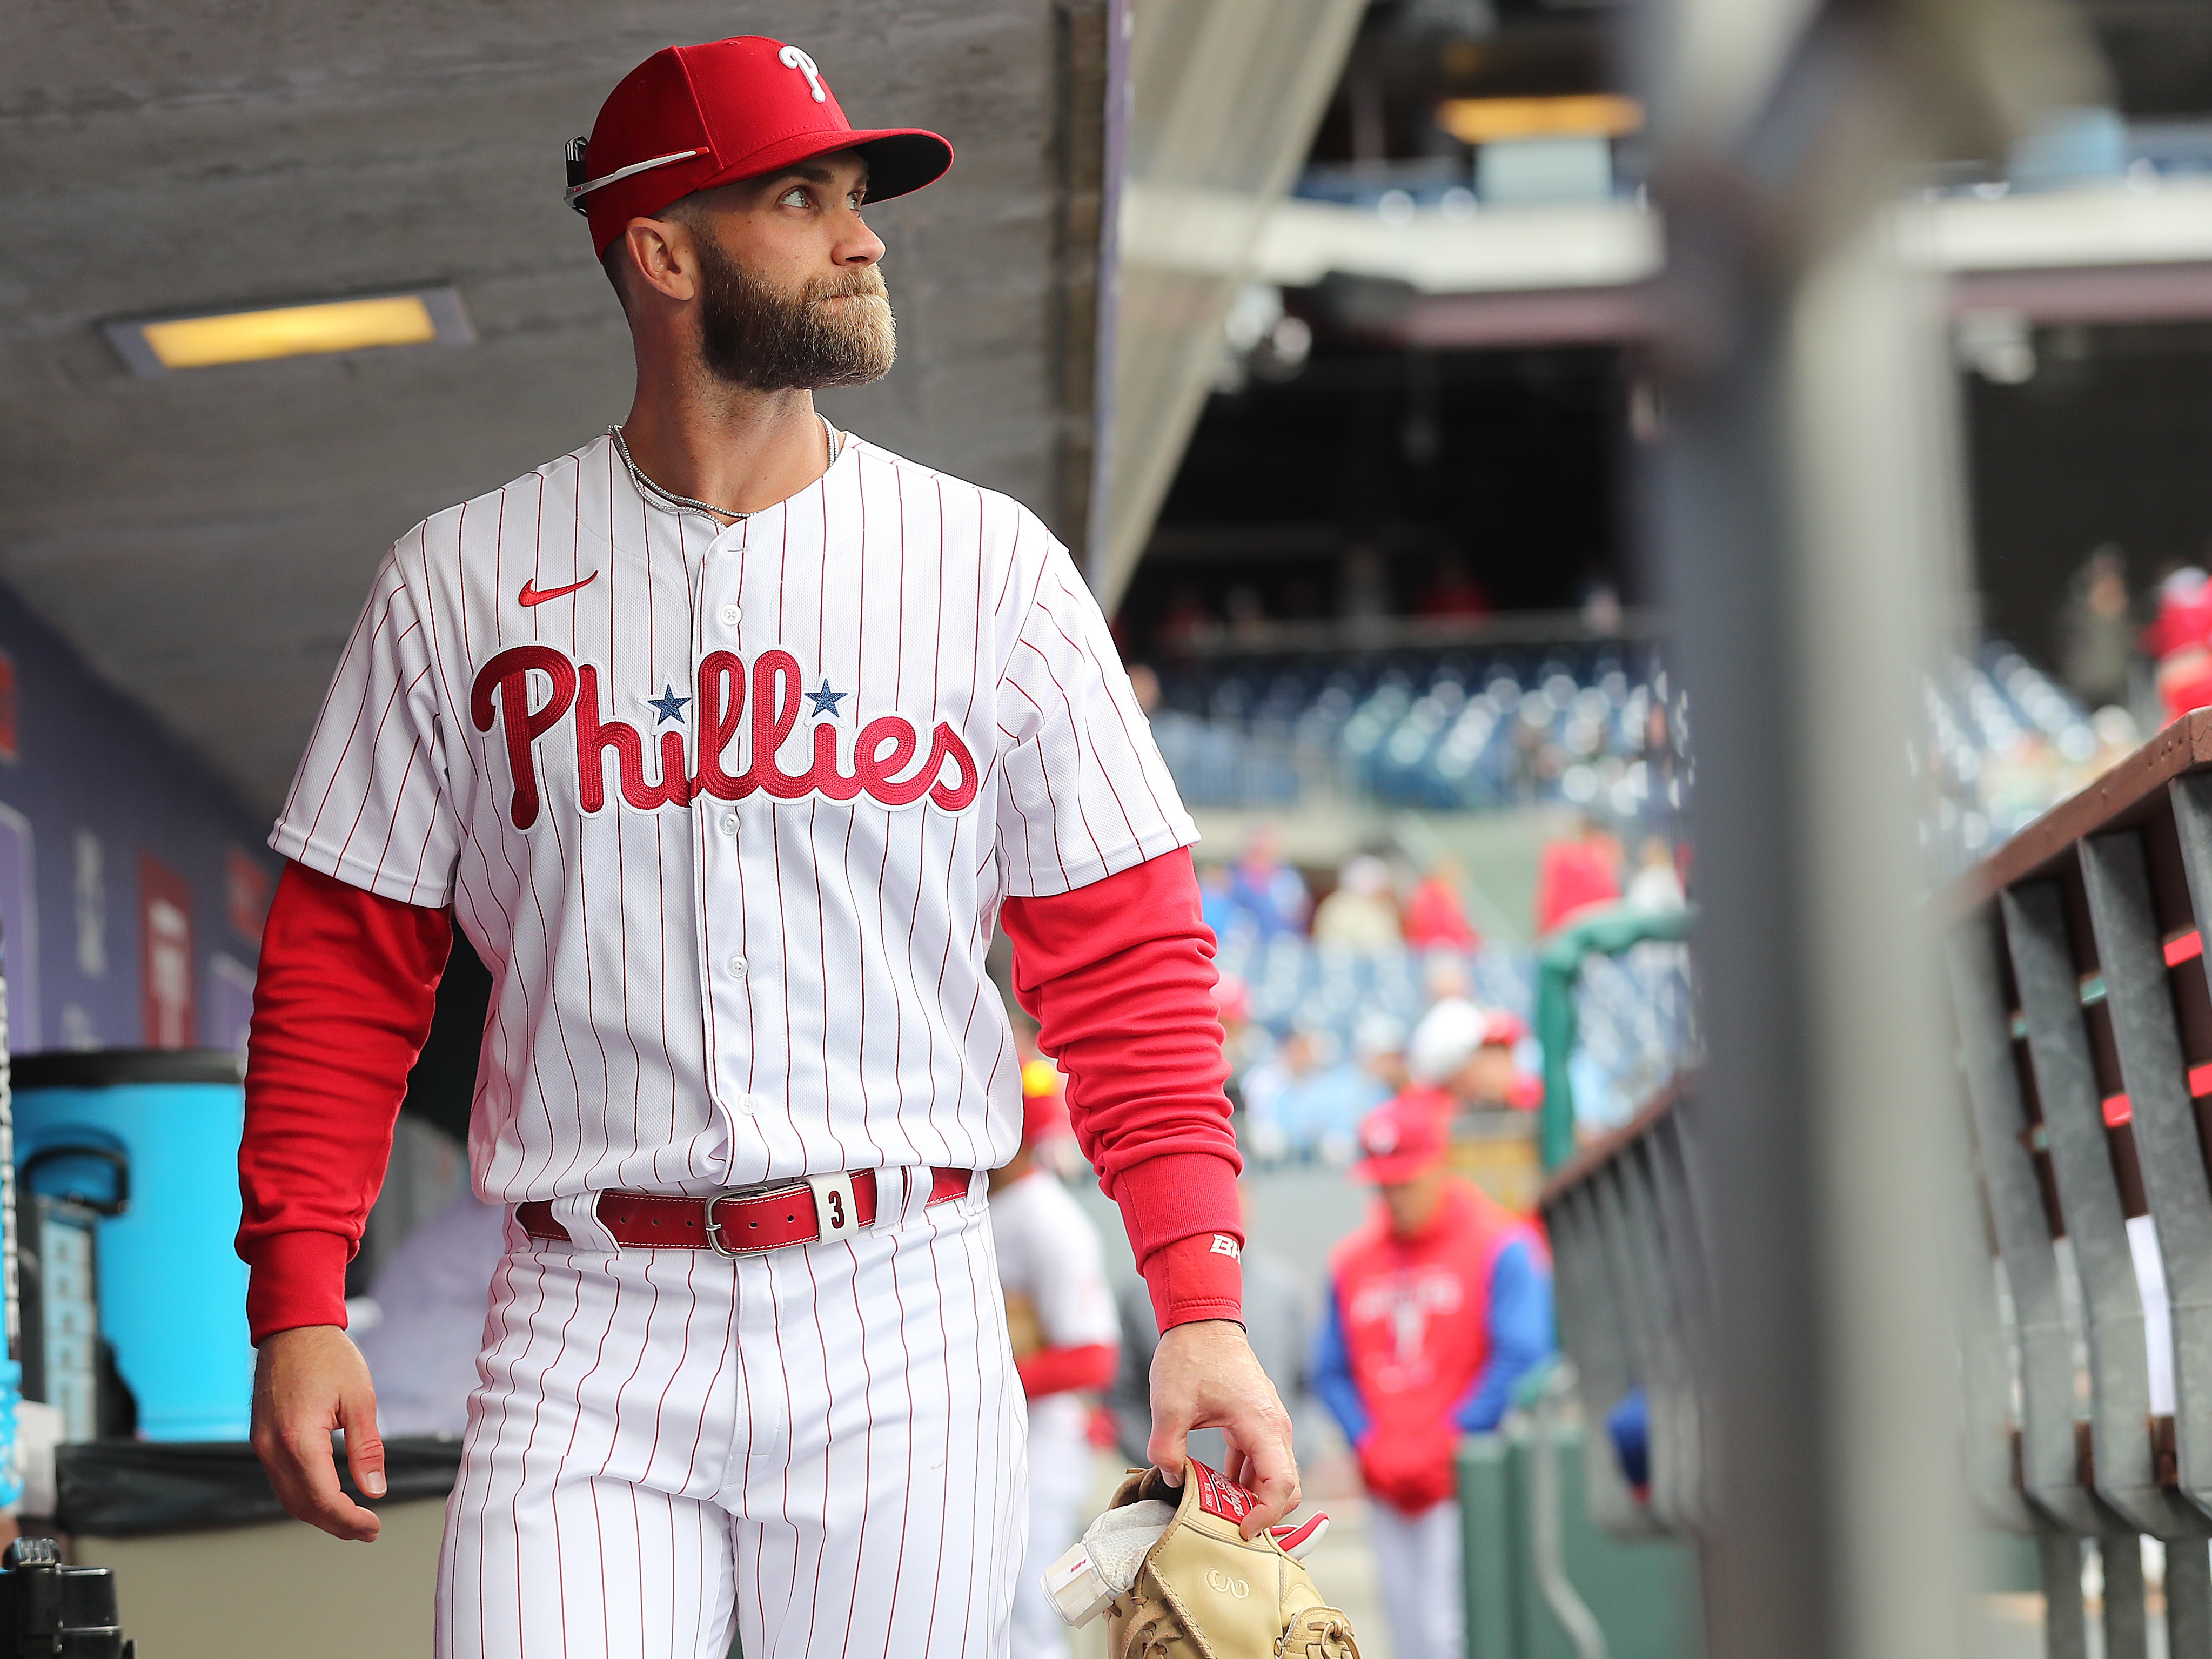 Stark: Bryce Harper is back with the Phillies. But what lies ahead